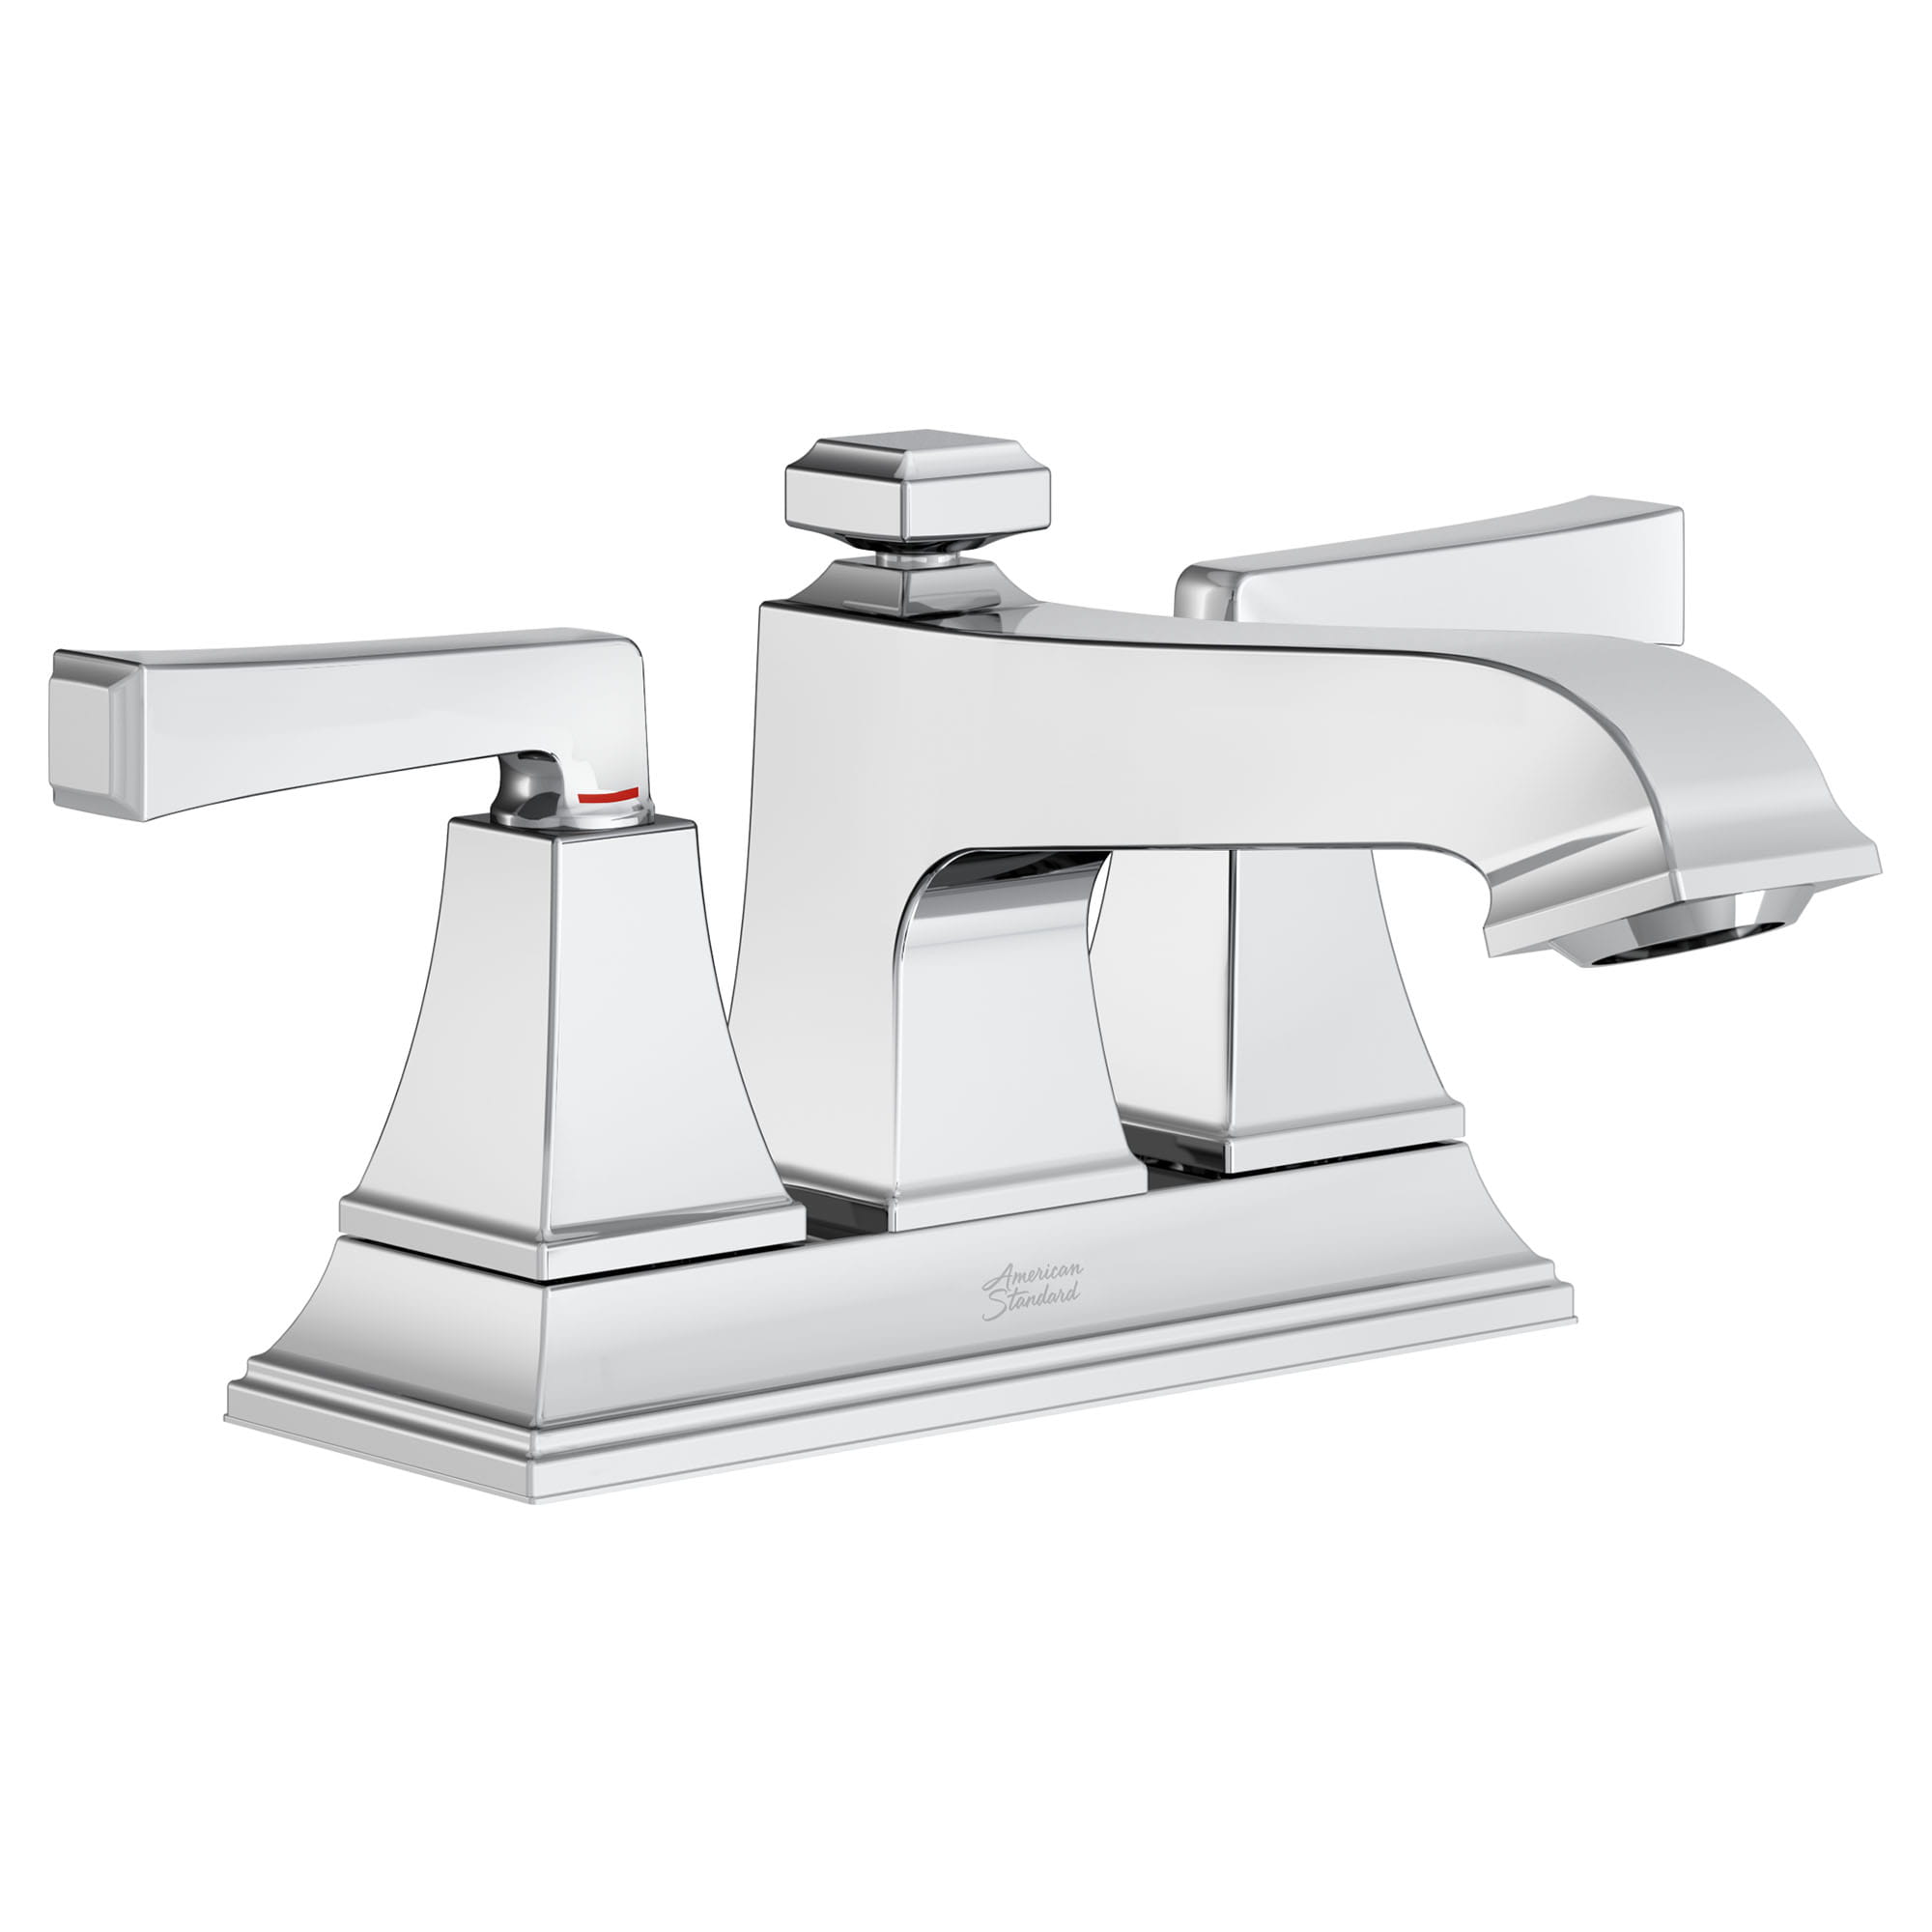 Town Square S 4 Inch Centerset 2 Handle Bathroom Faucet 12 gpm 45 L min With Lever Handles CHROME